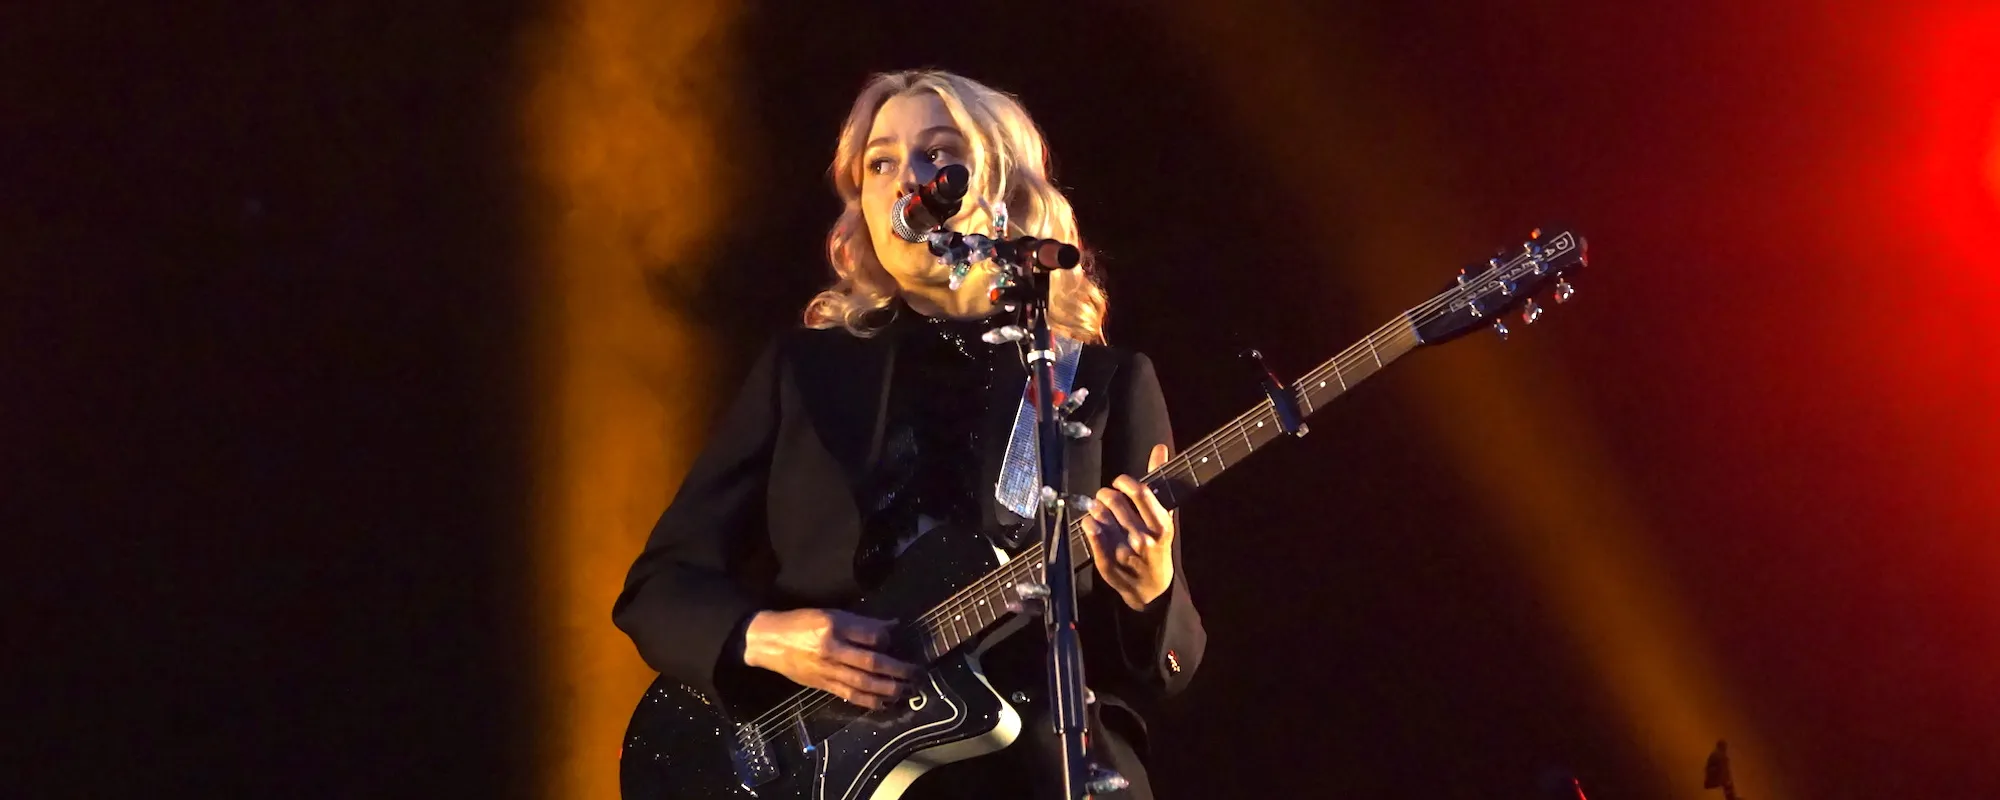 Watch: The Killers and Phoebe Bridgers Perform “Runaway Horses” Live for the First Time